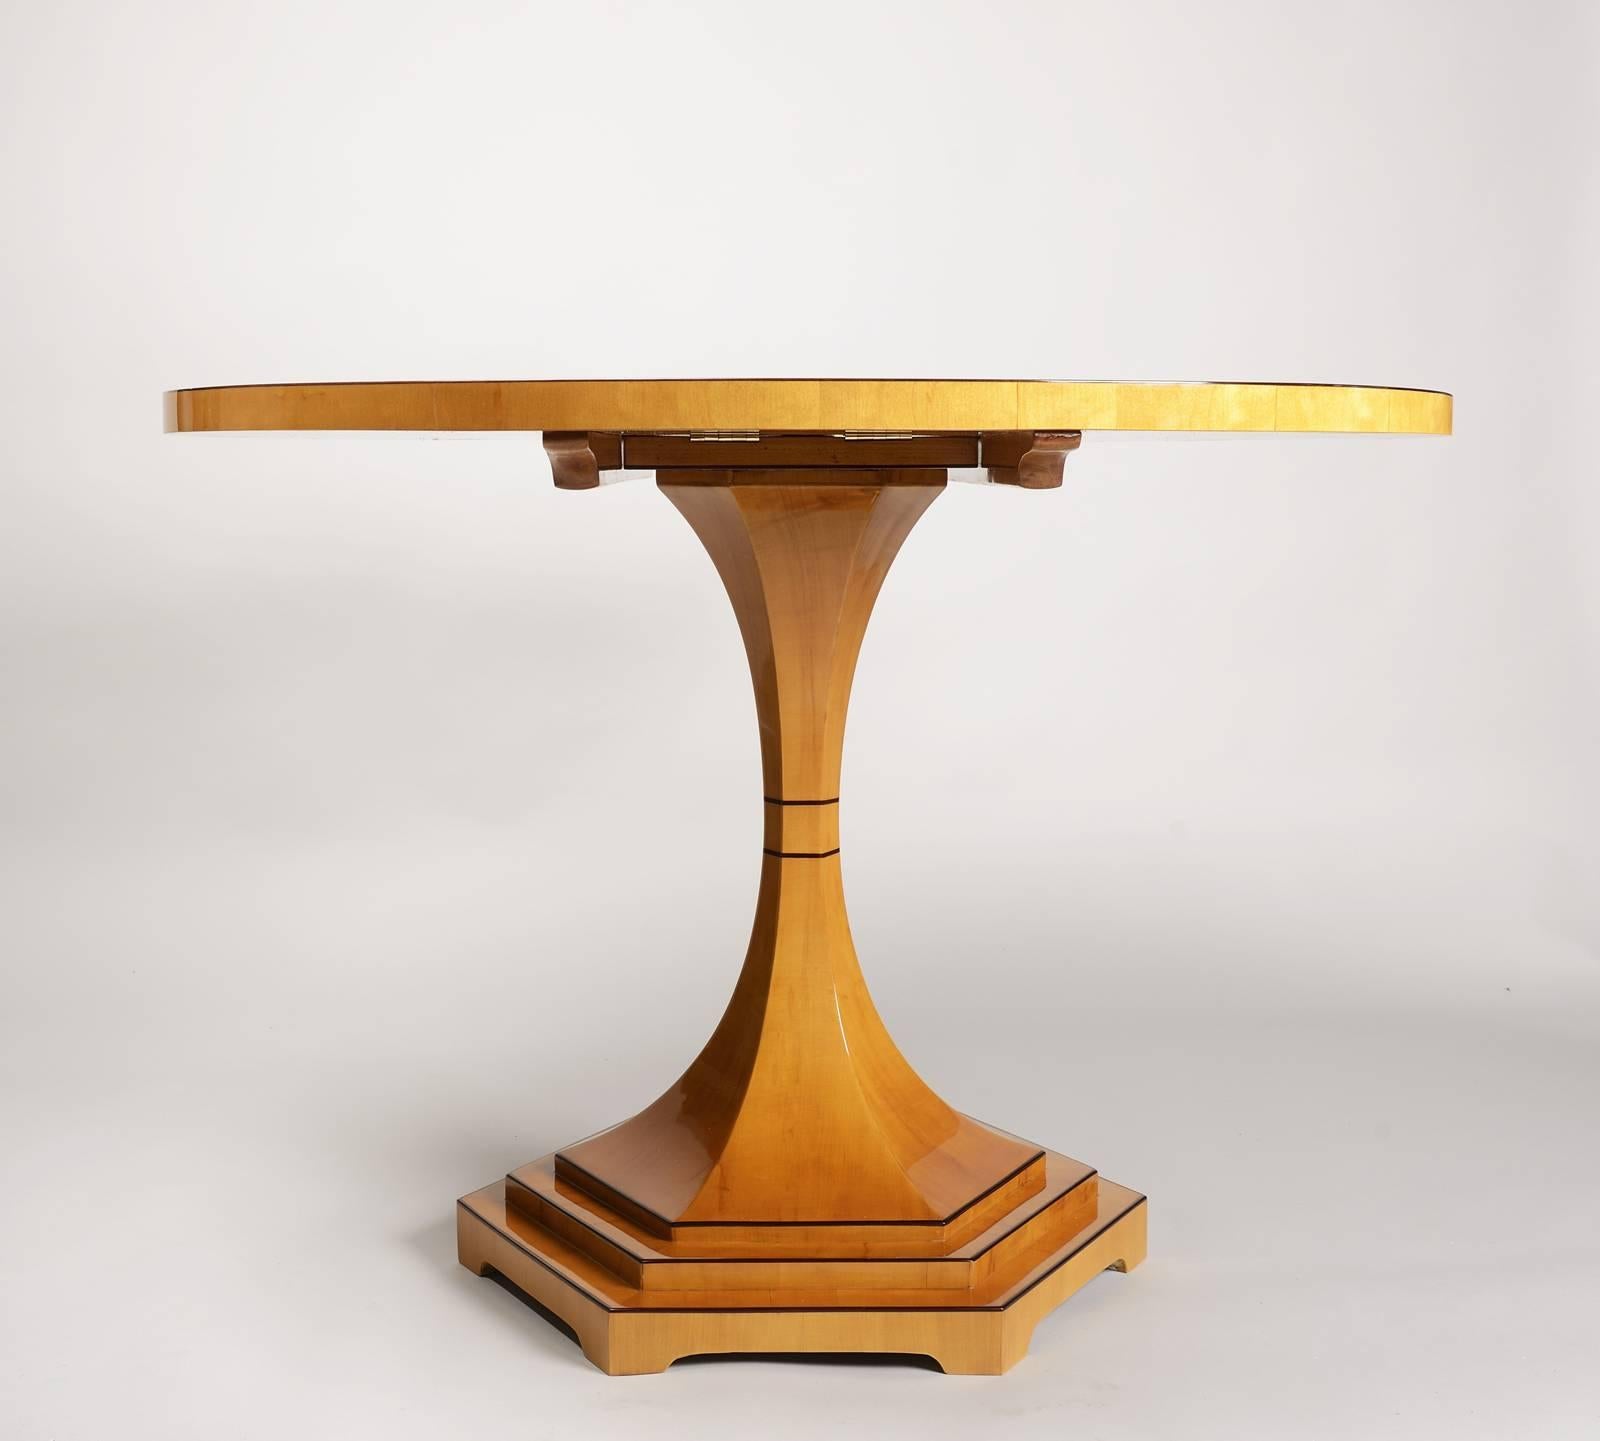 Tilt top table in maple veneer with mahogany inlays.  Iconic Vienna design of exceptional style and quality.